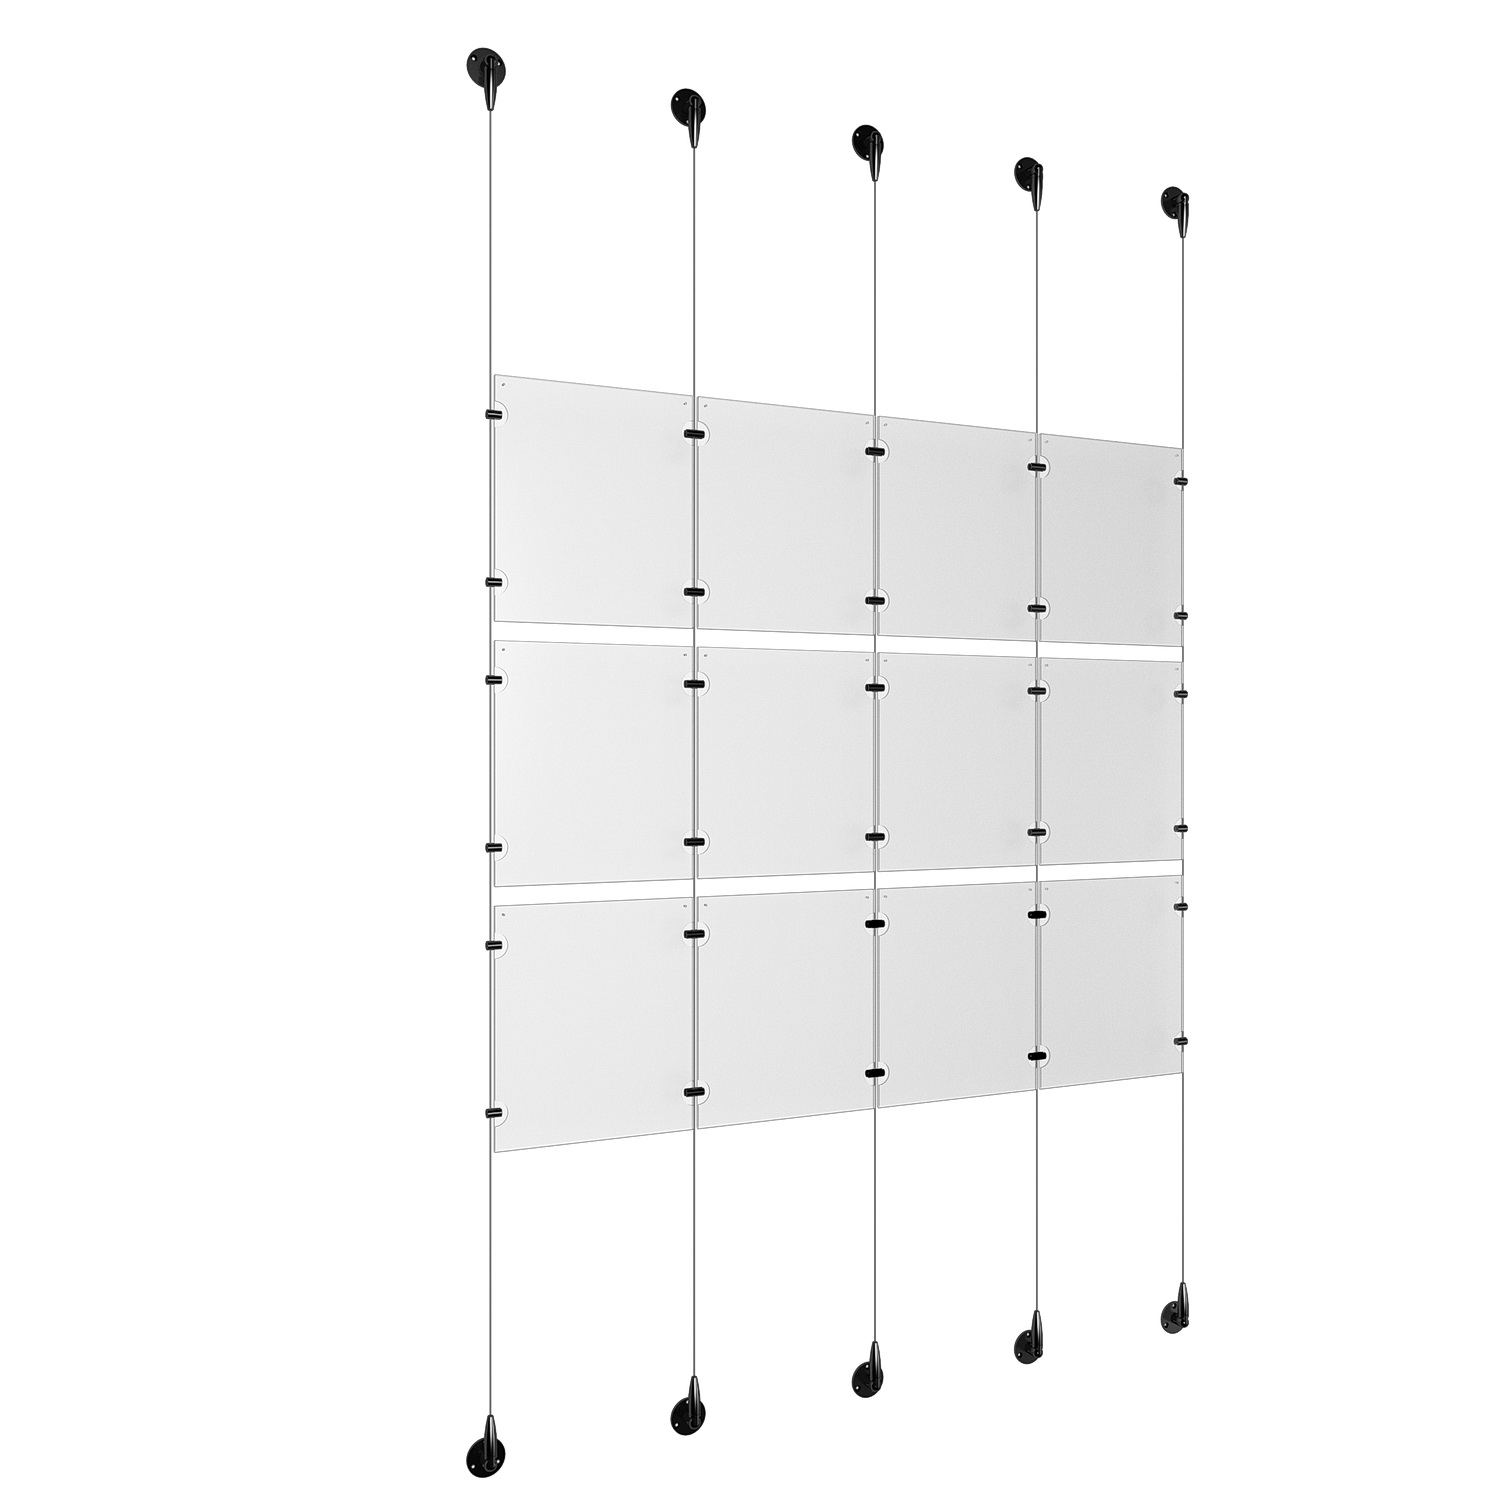 (12) 8-1/2'' Width x 11'' Height Clear Acrylic Frame & (5) Aluminum Matte Black Adjustable Angle Signature 1/8'' Diameter Cable Systems with (12) Single-Sided Panel Grippers (18) Double-Sided Panel Grippers